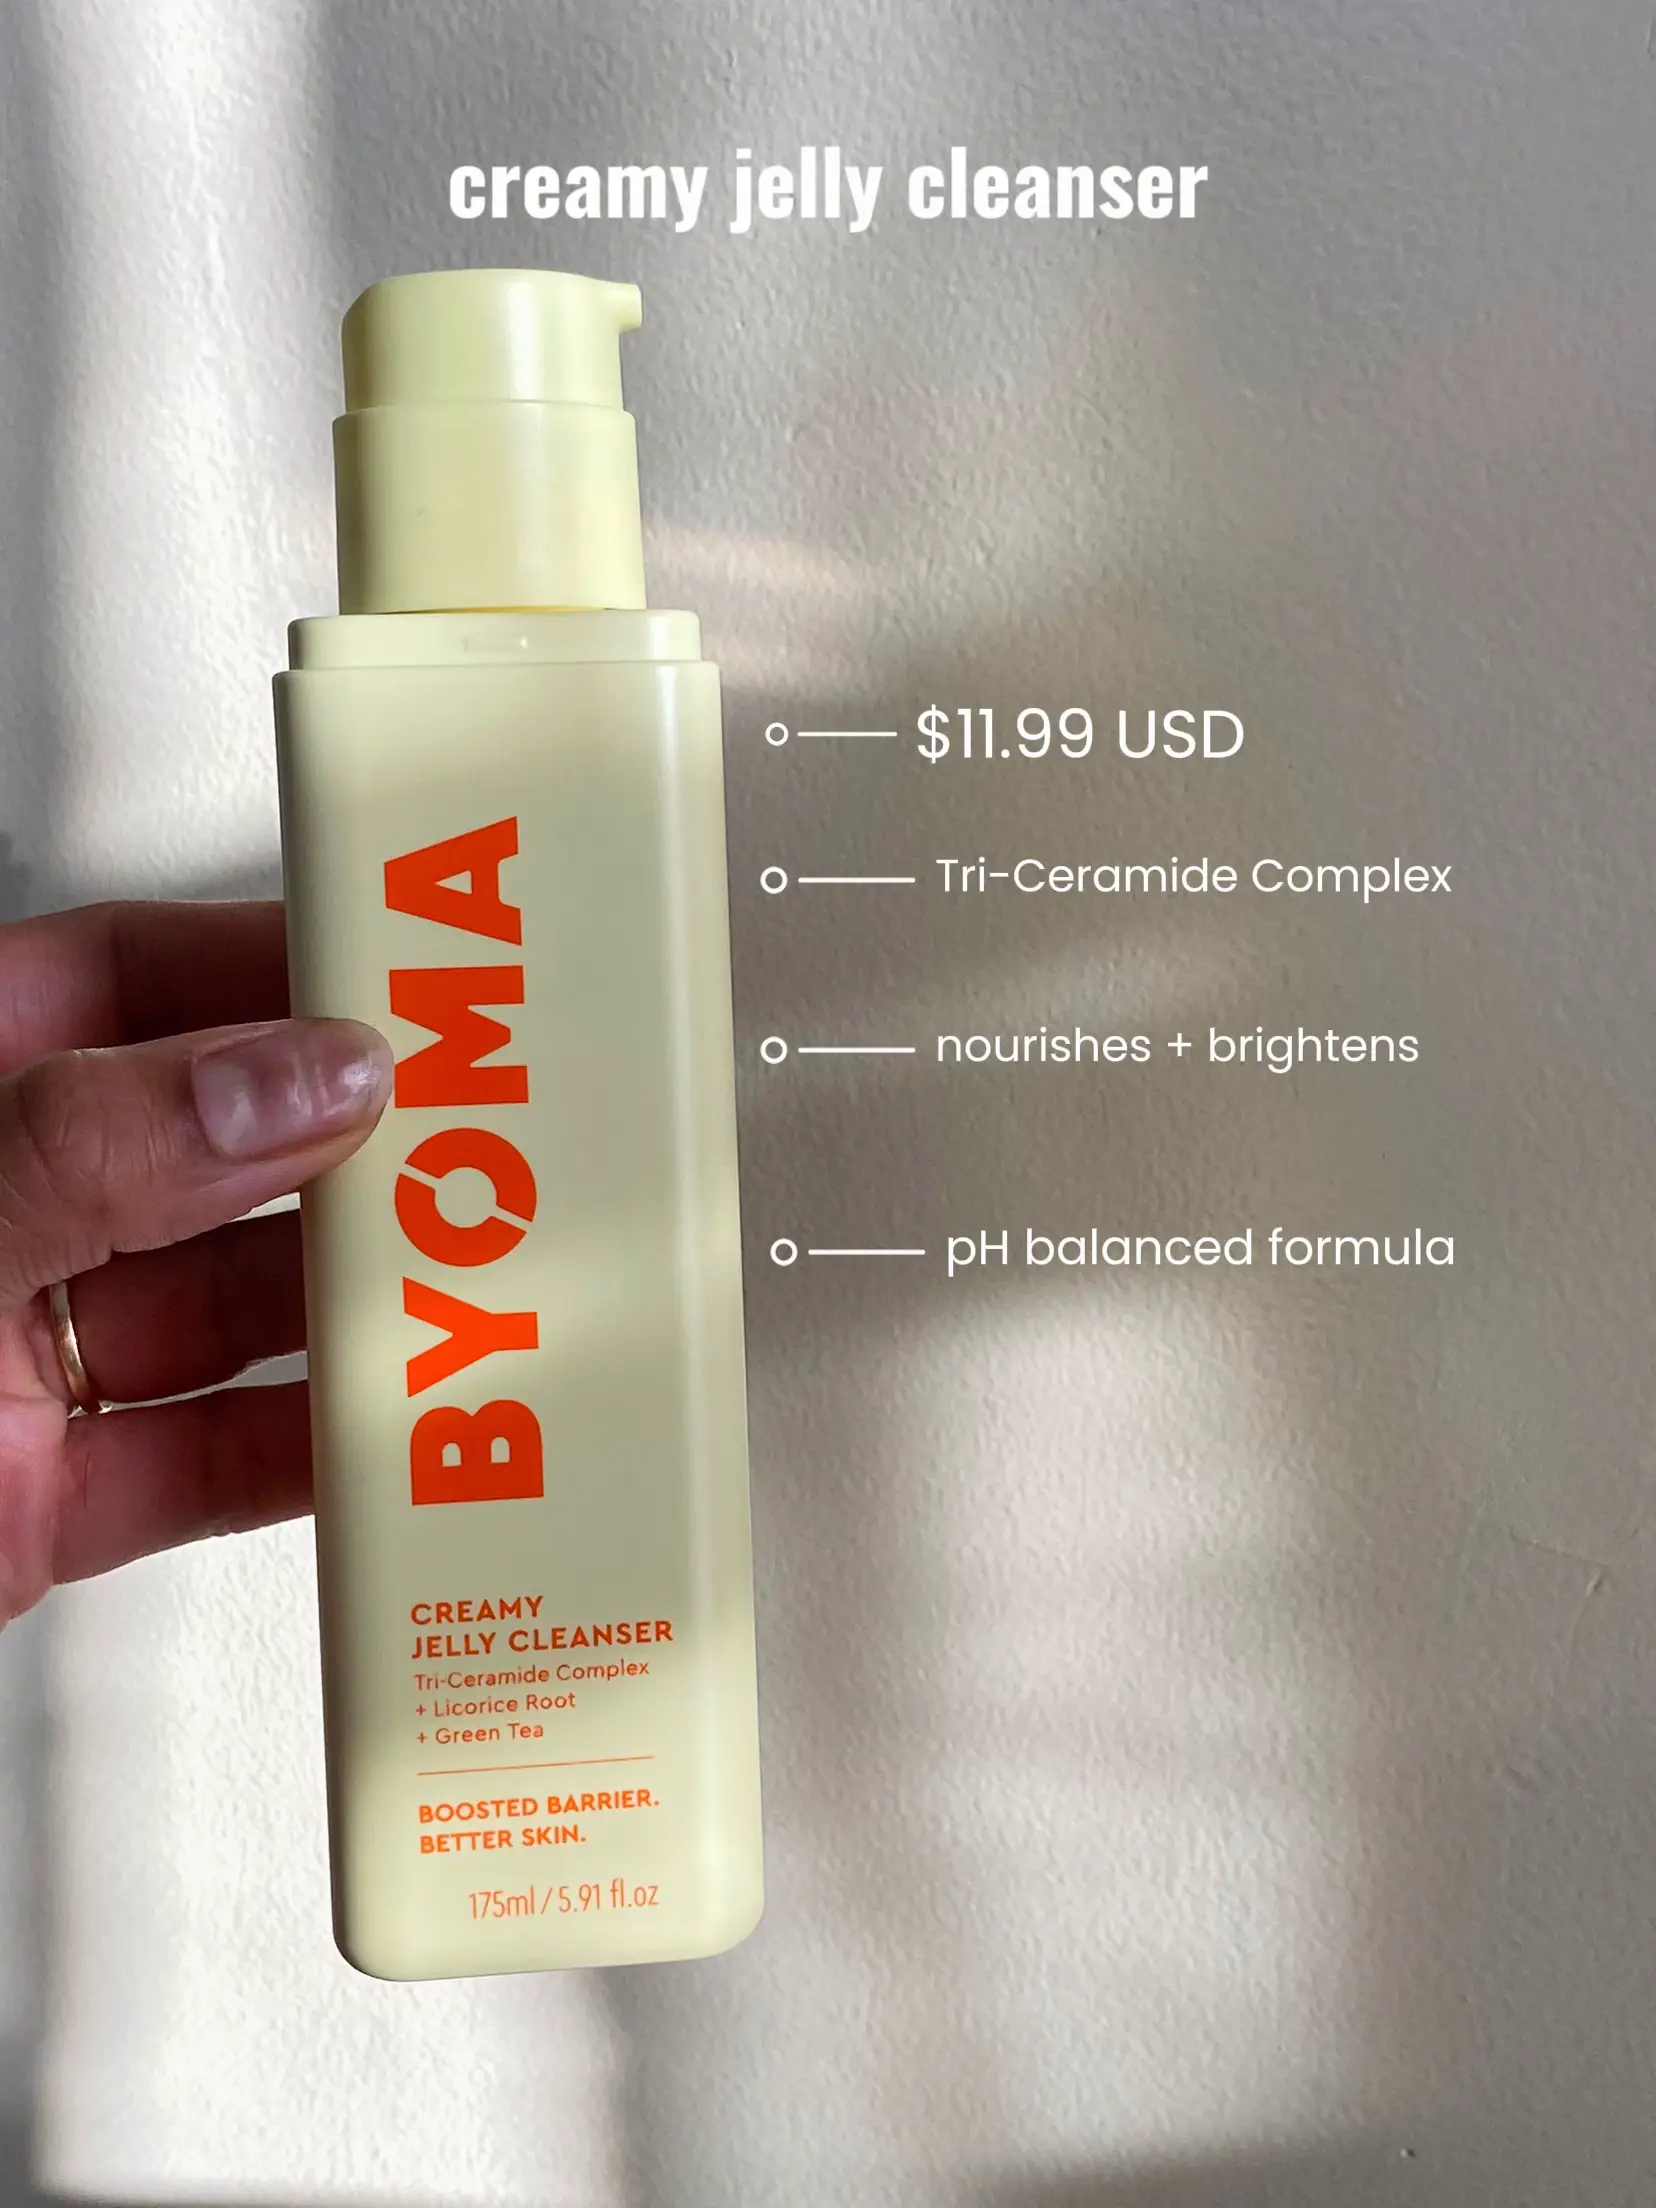 BYOMA skincare review, Gallery posted by destany lilly